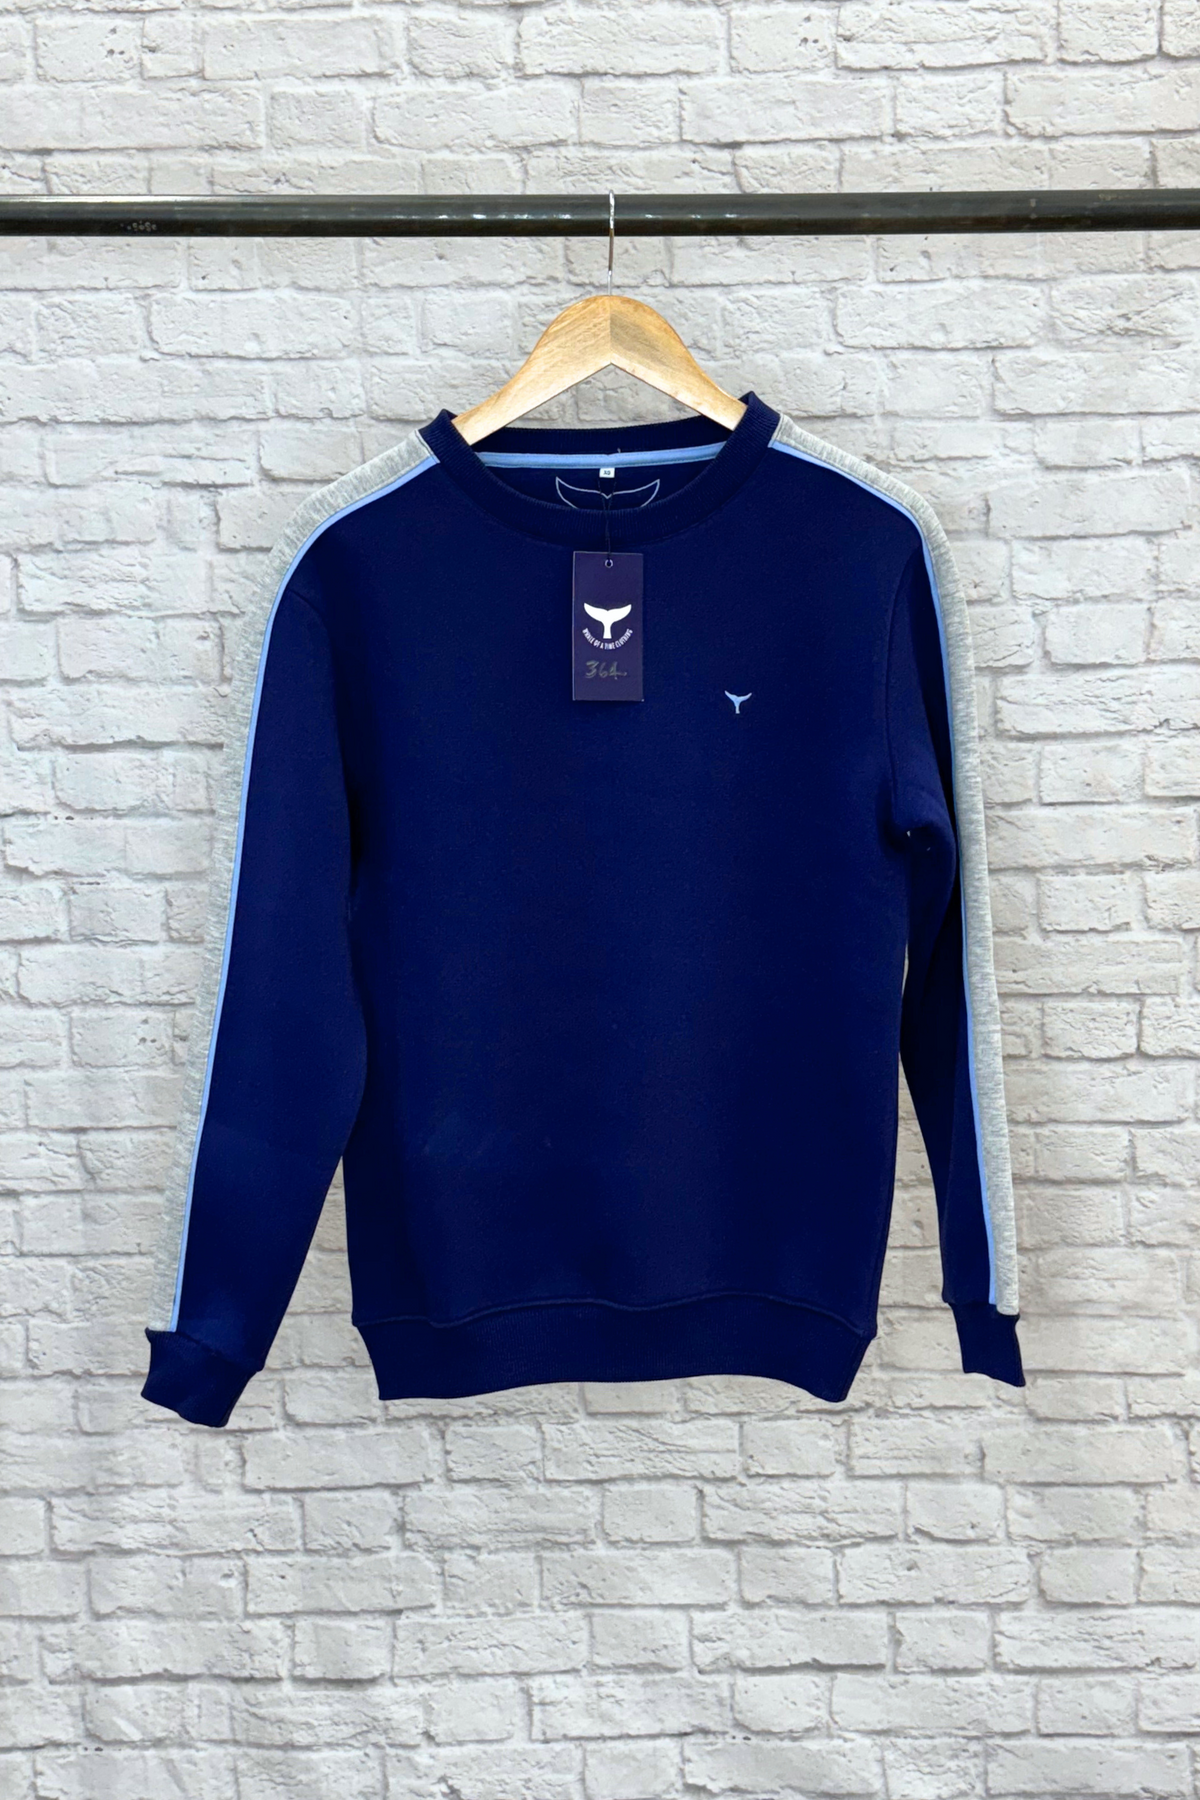 S&S Salthouse Unisex Sweatshirt - Navy XS (364) - Whale Of A Time Clothing